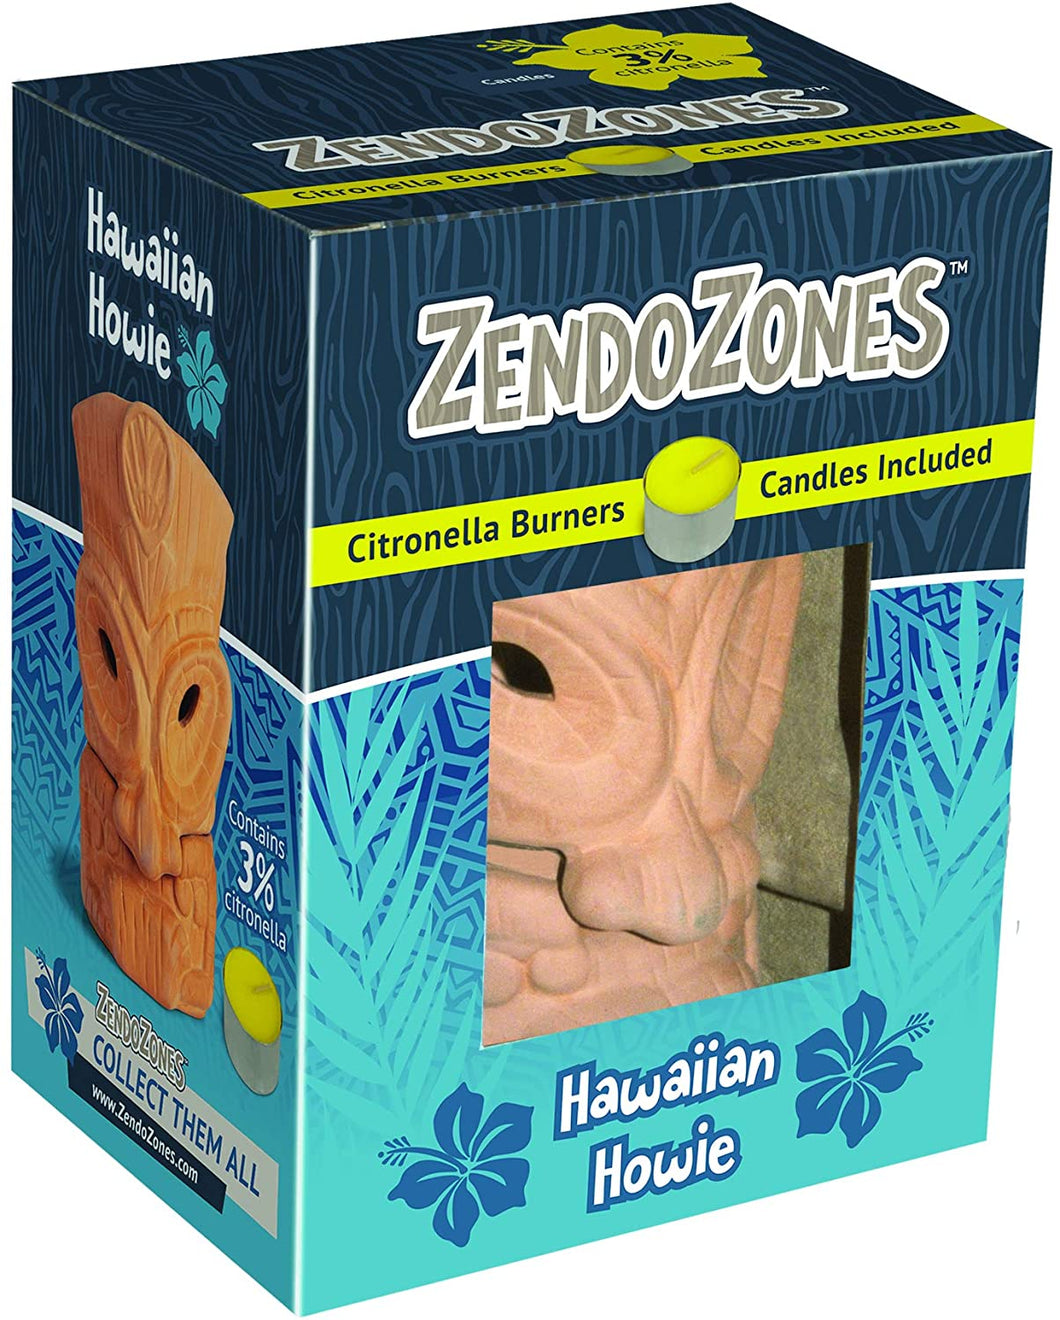 CHS ZendoZones Hawaiian Howie All-Natural Citronella Candle Burner with 3 Candles All-natural Citronella Candle burns for up to 8 hours Perfect for patios, decks, backyards, campsites, poolside, and more Portable burner figurine to help you find your Zen anytime and anywhere Place candle in burner, light candle, you are in the ZendoZone INCLUDES 3 Citronella Candles with 3% Citronella